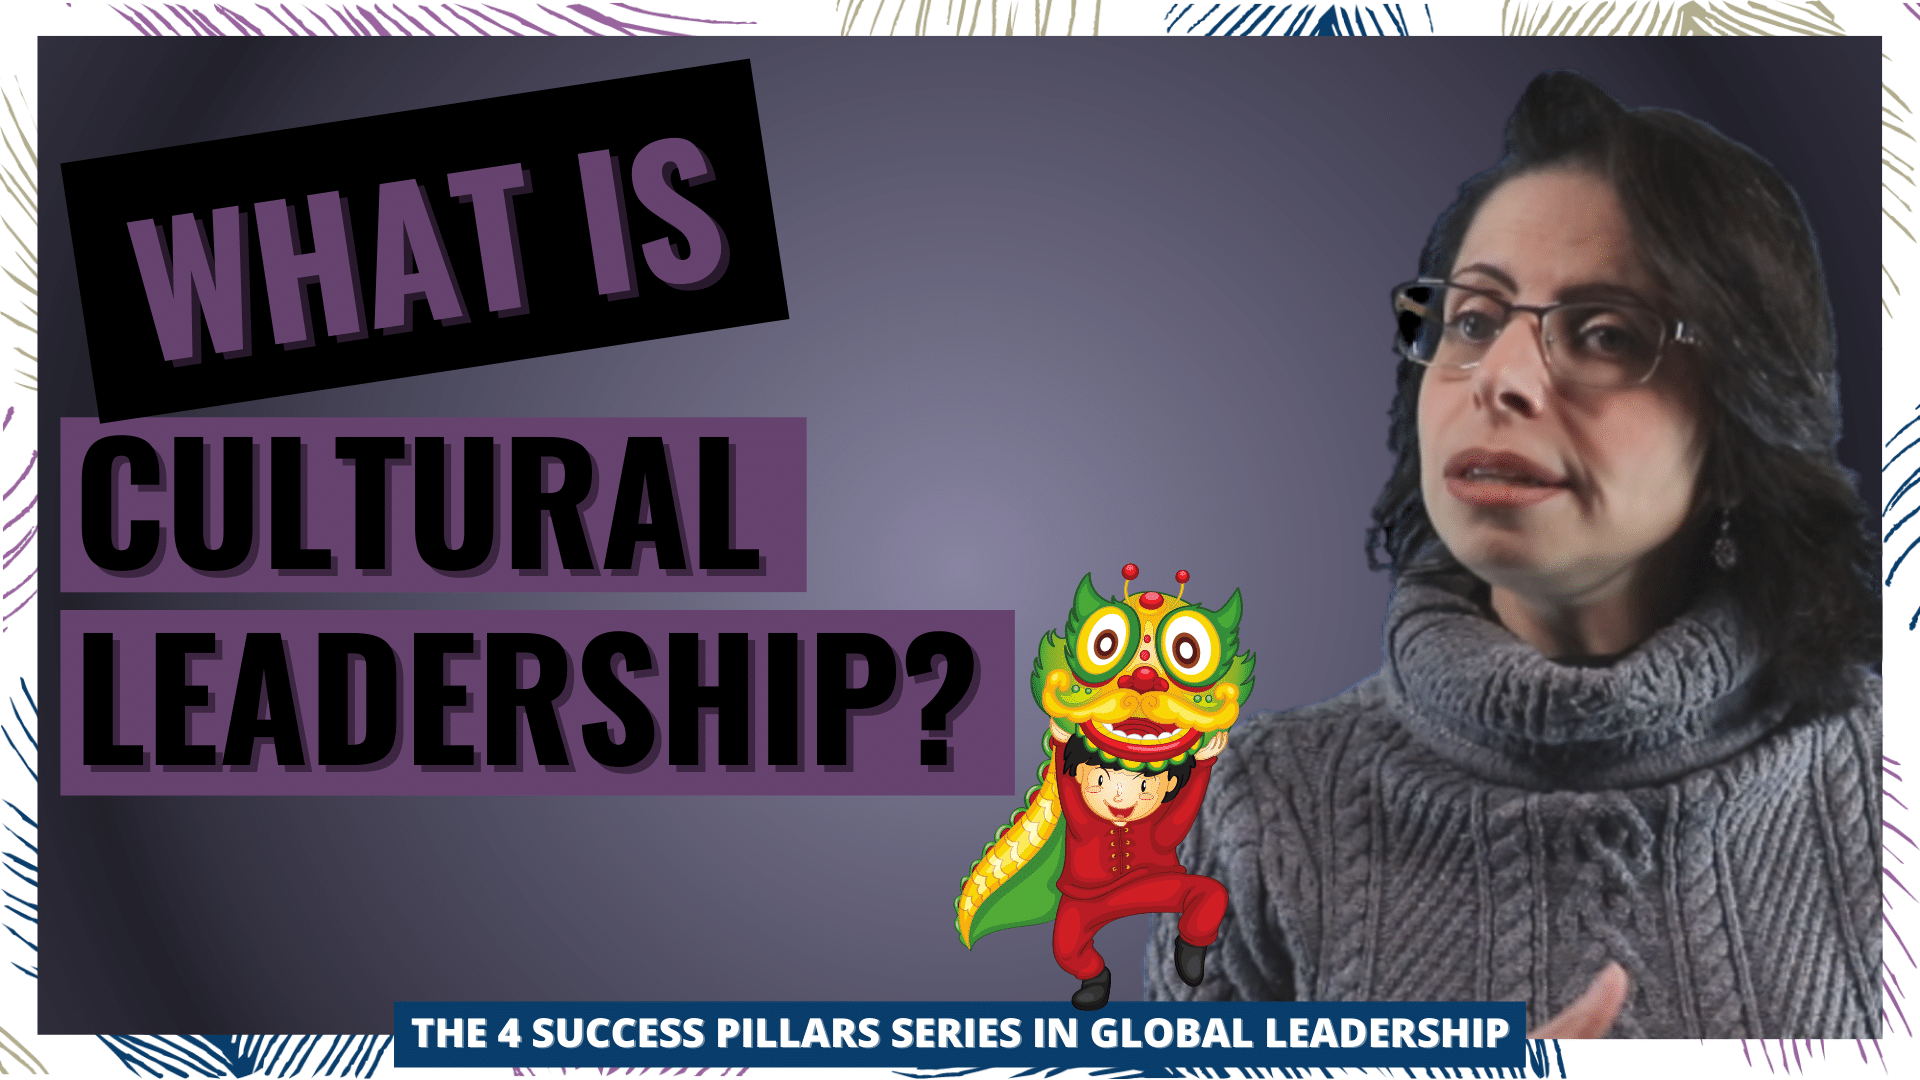 Youtube Video - What Is Cultural Leadership